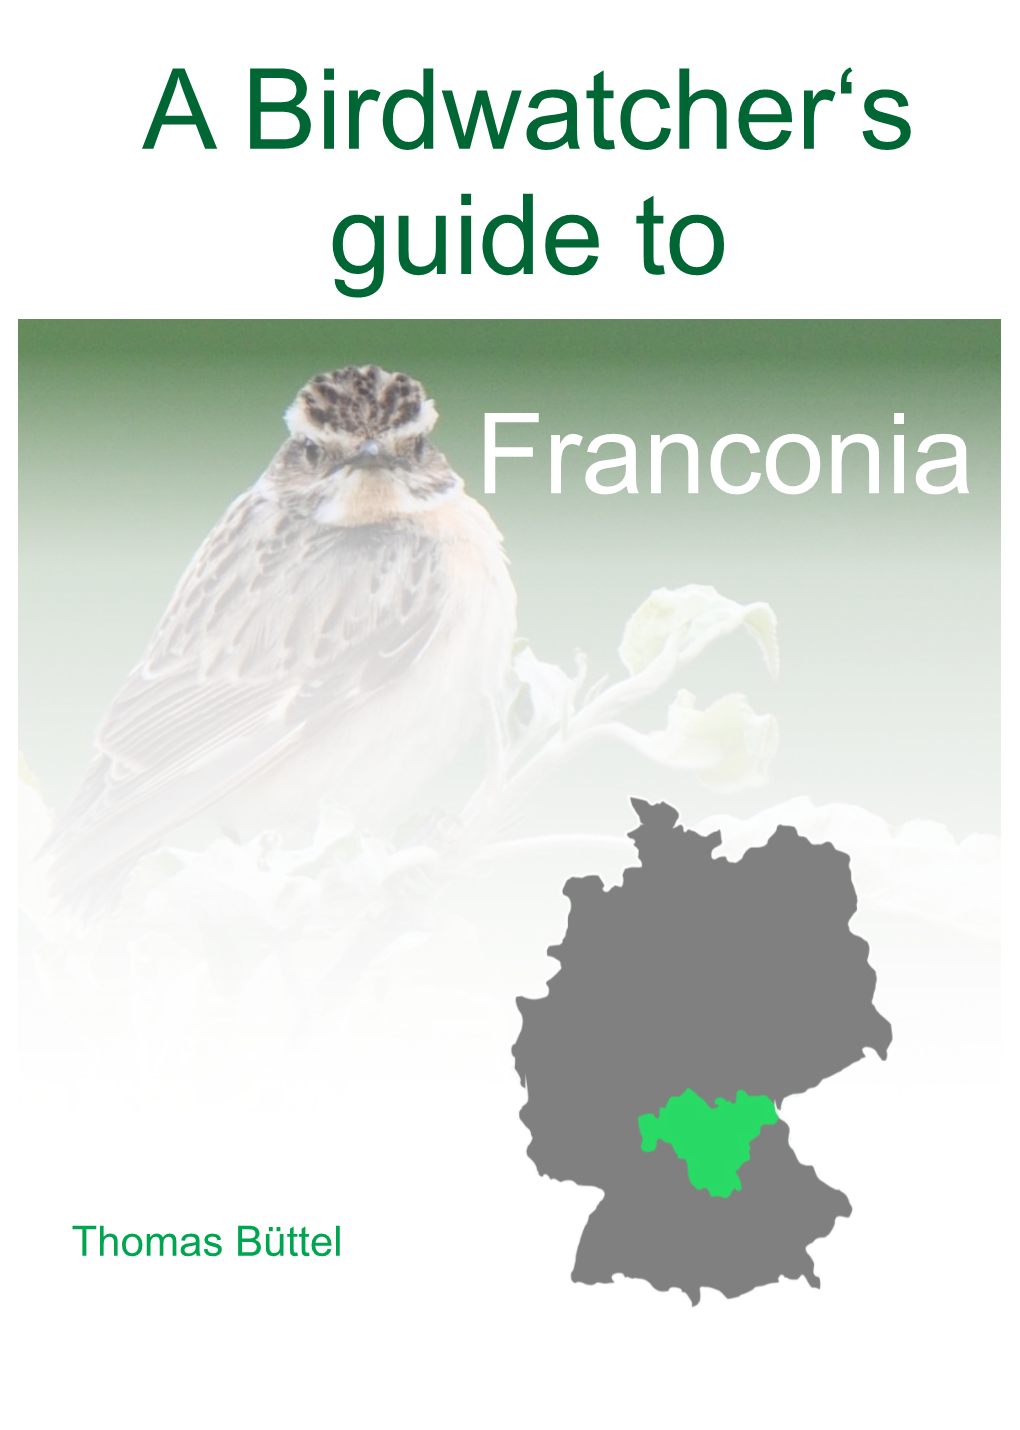 A Birdwatcher's Guide to Franconia